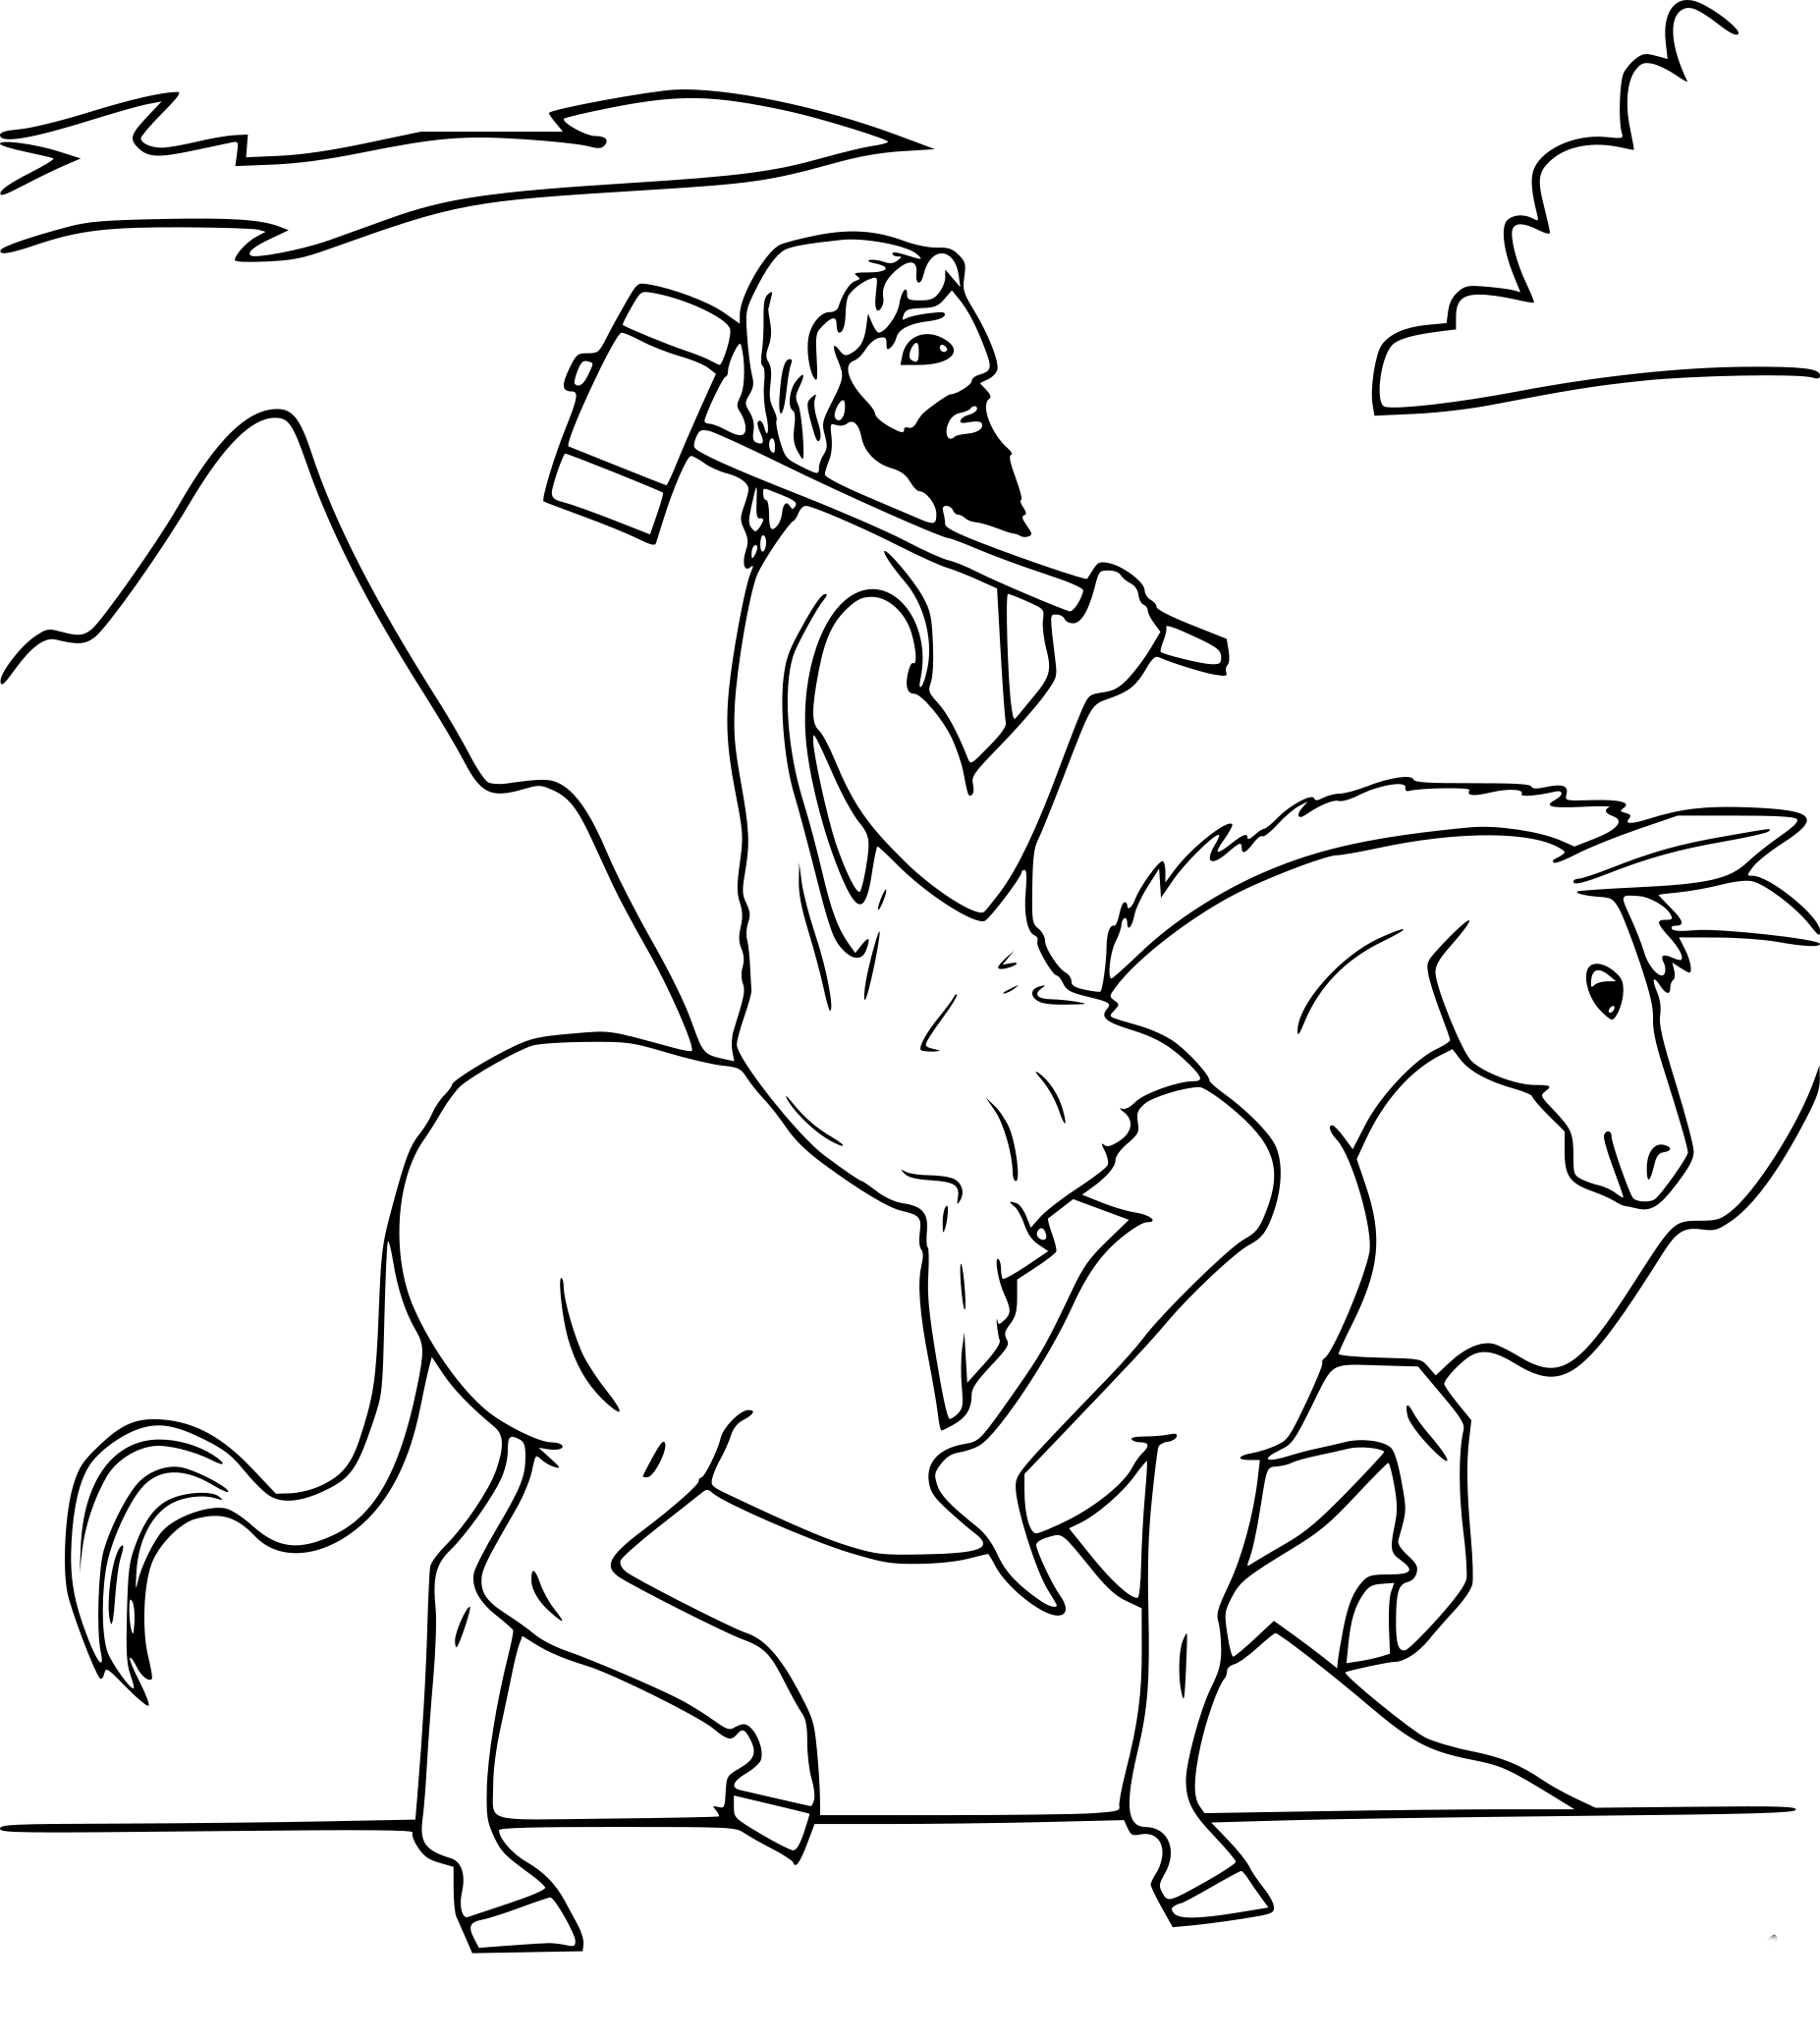 Hephaistos coloring page